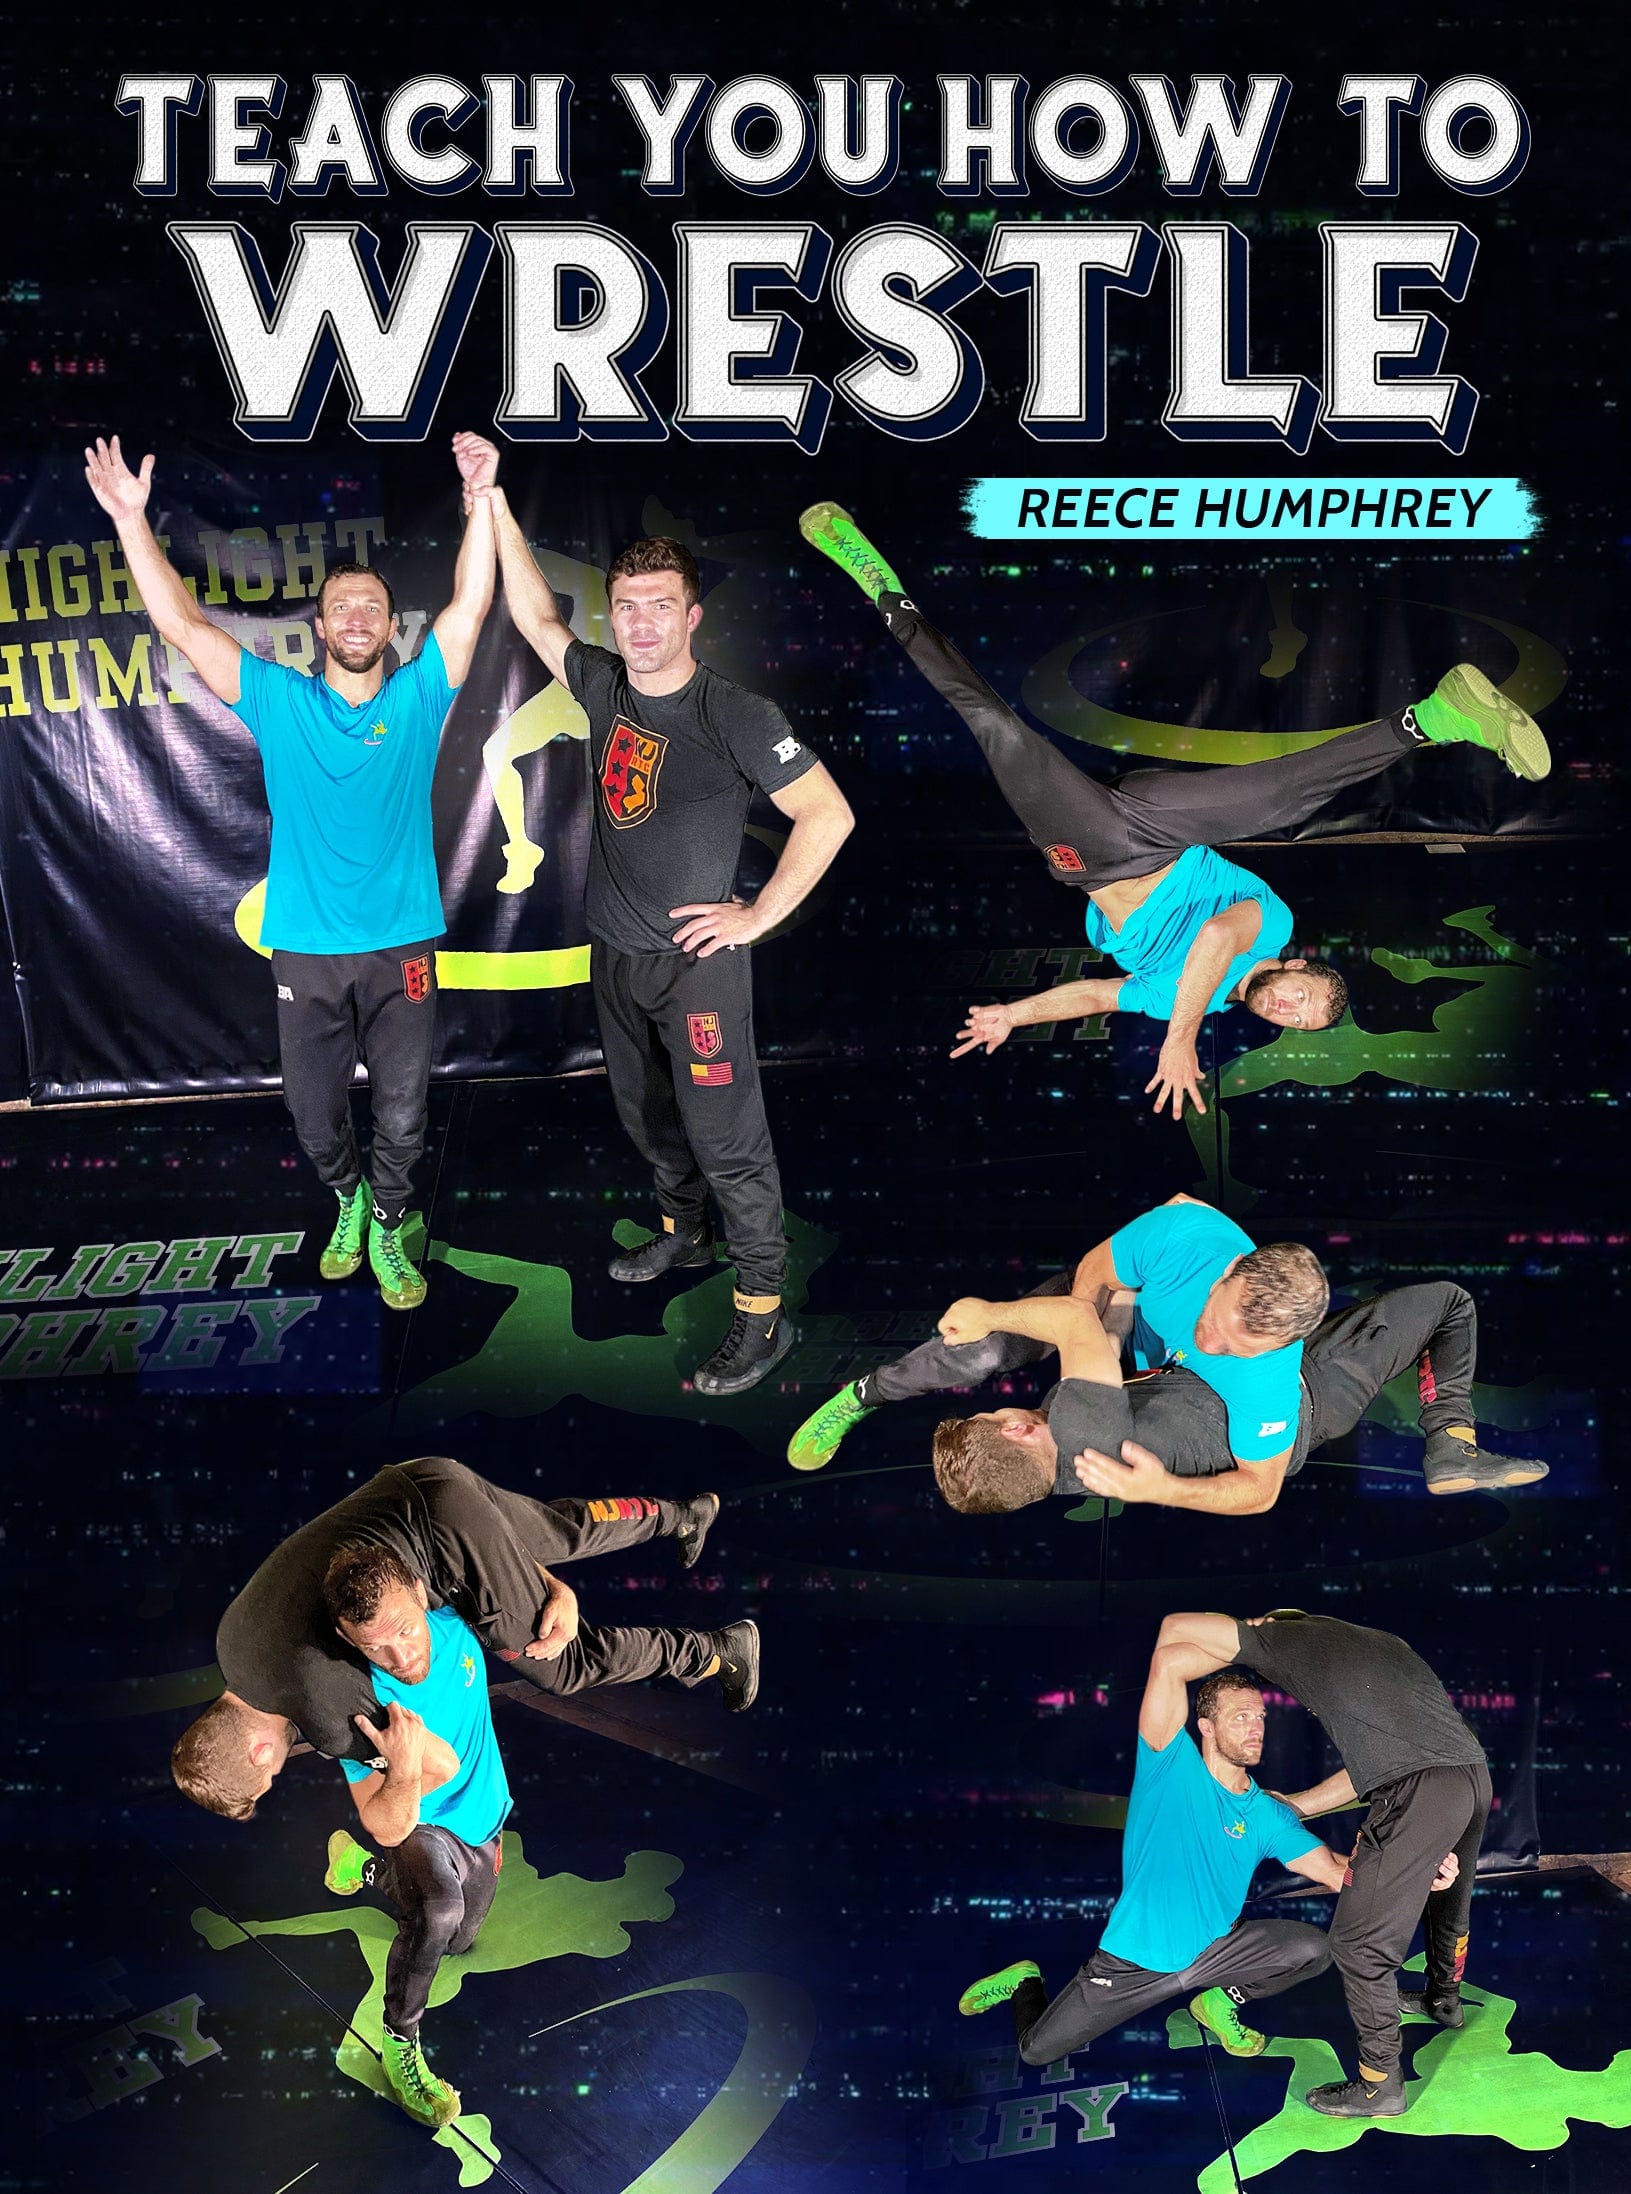 Teach you How To Wrestle by Reece Humphrey - Fanatic Wrestling